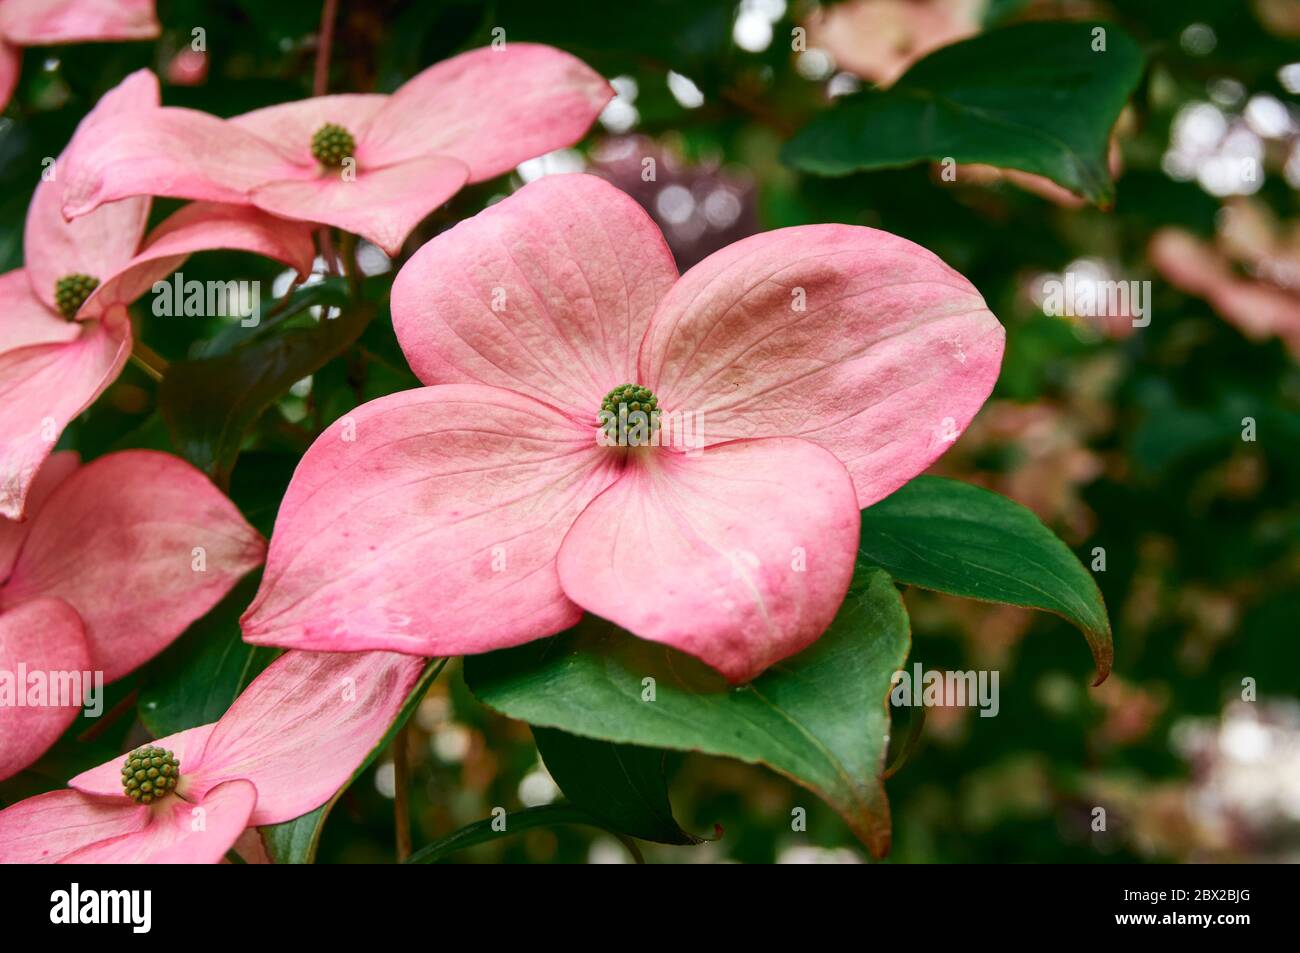 Closeup of red dogwood flowers (Cornus florida) blooming in spring, Vancouver, British Columbia, Canada Stock Photo